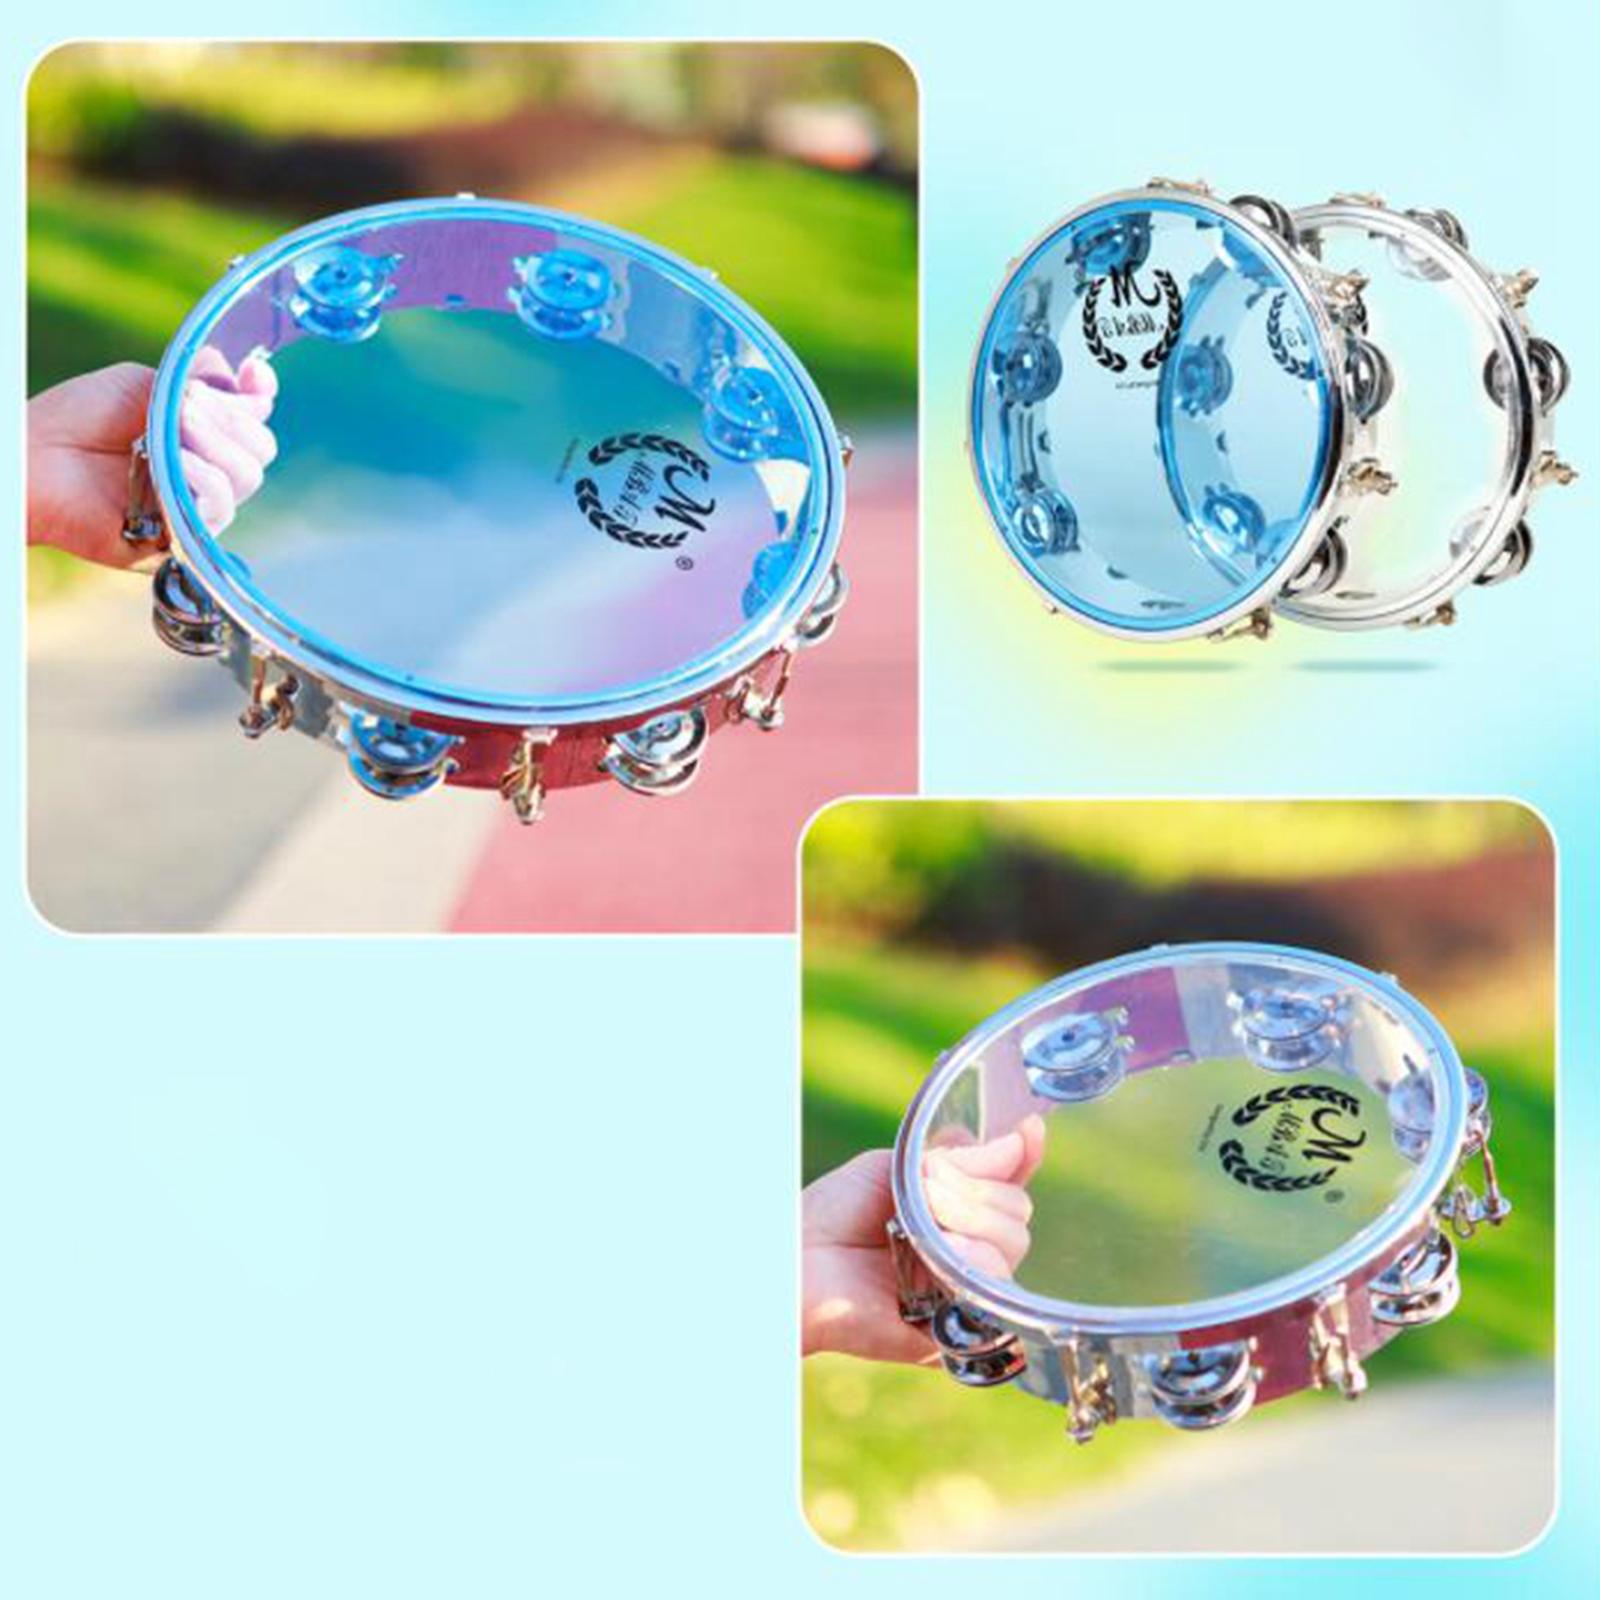 Handheld Tambourine Transparent Developmental Portable for Infant Home 8inch Clear